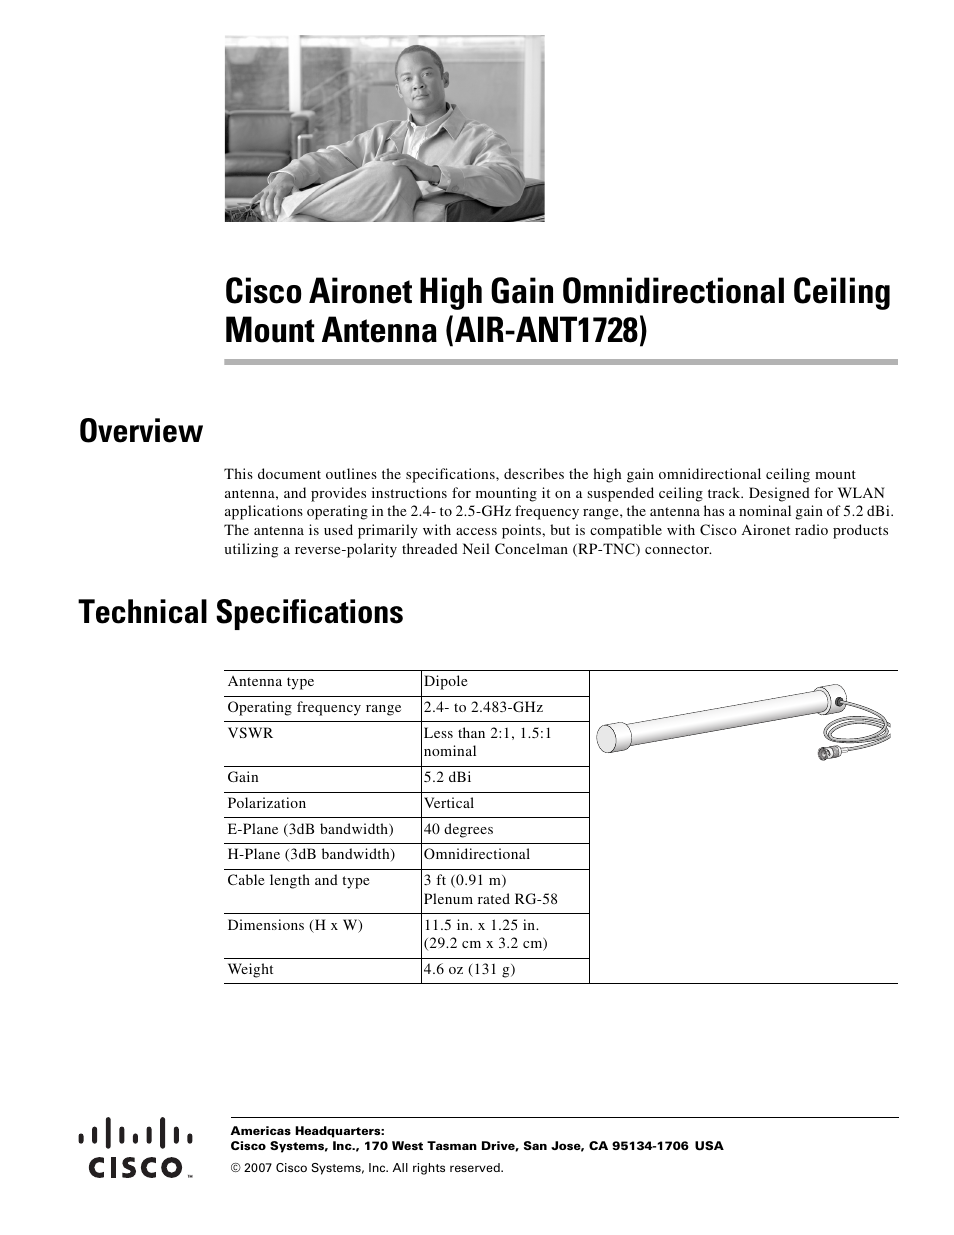 Cisco Aironet High Gain Omnidirectional Ceiling Mount Antenna AIR-ANT1728 User Manual | 4 pages